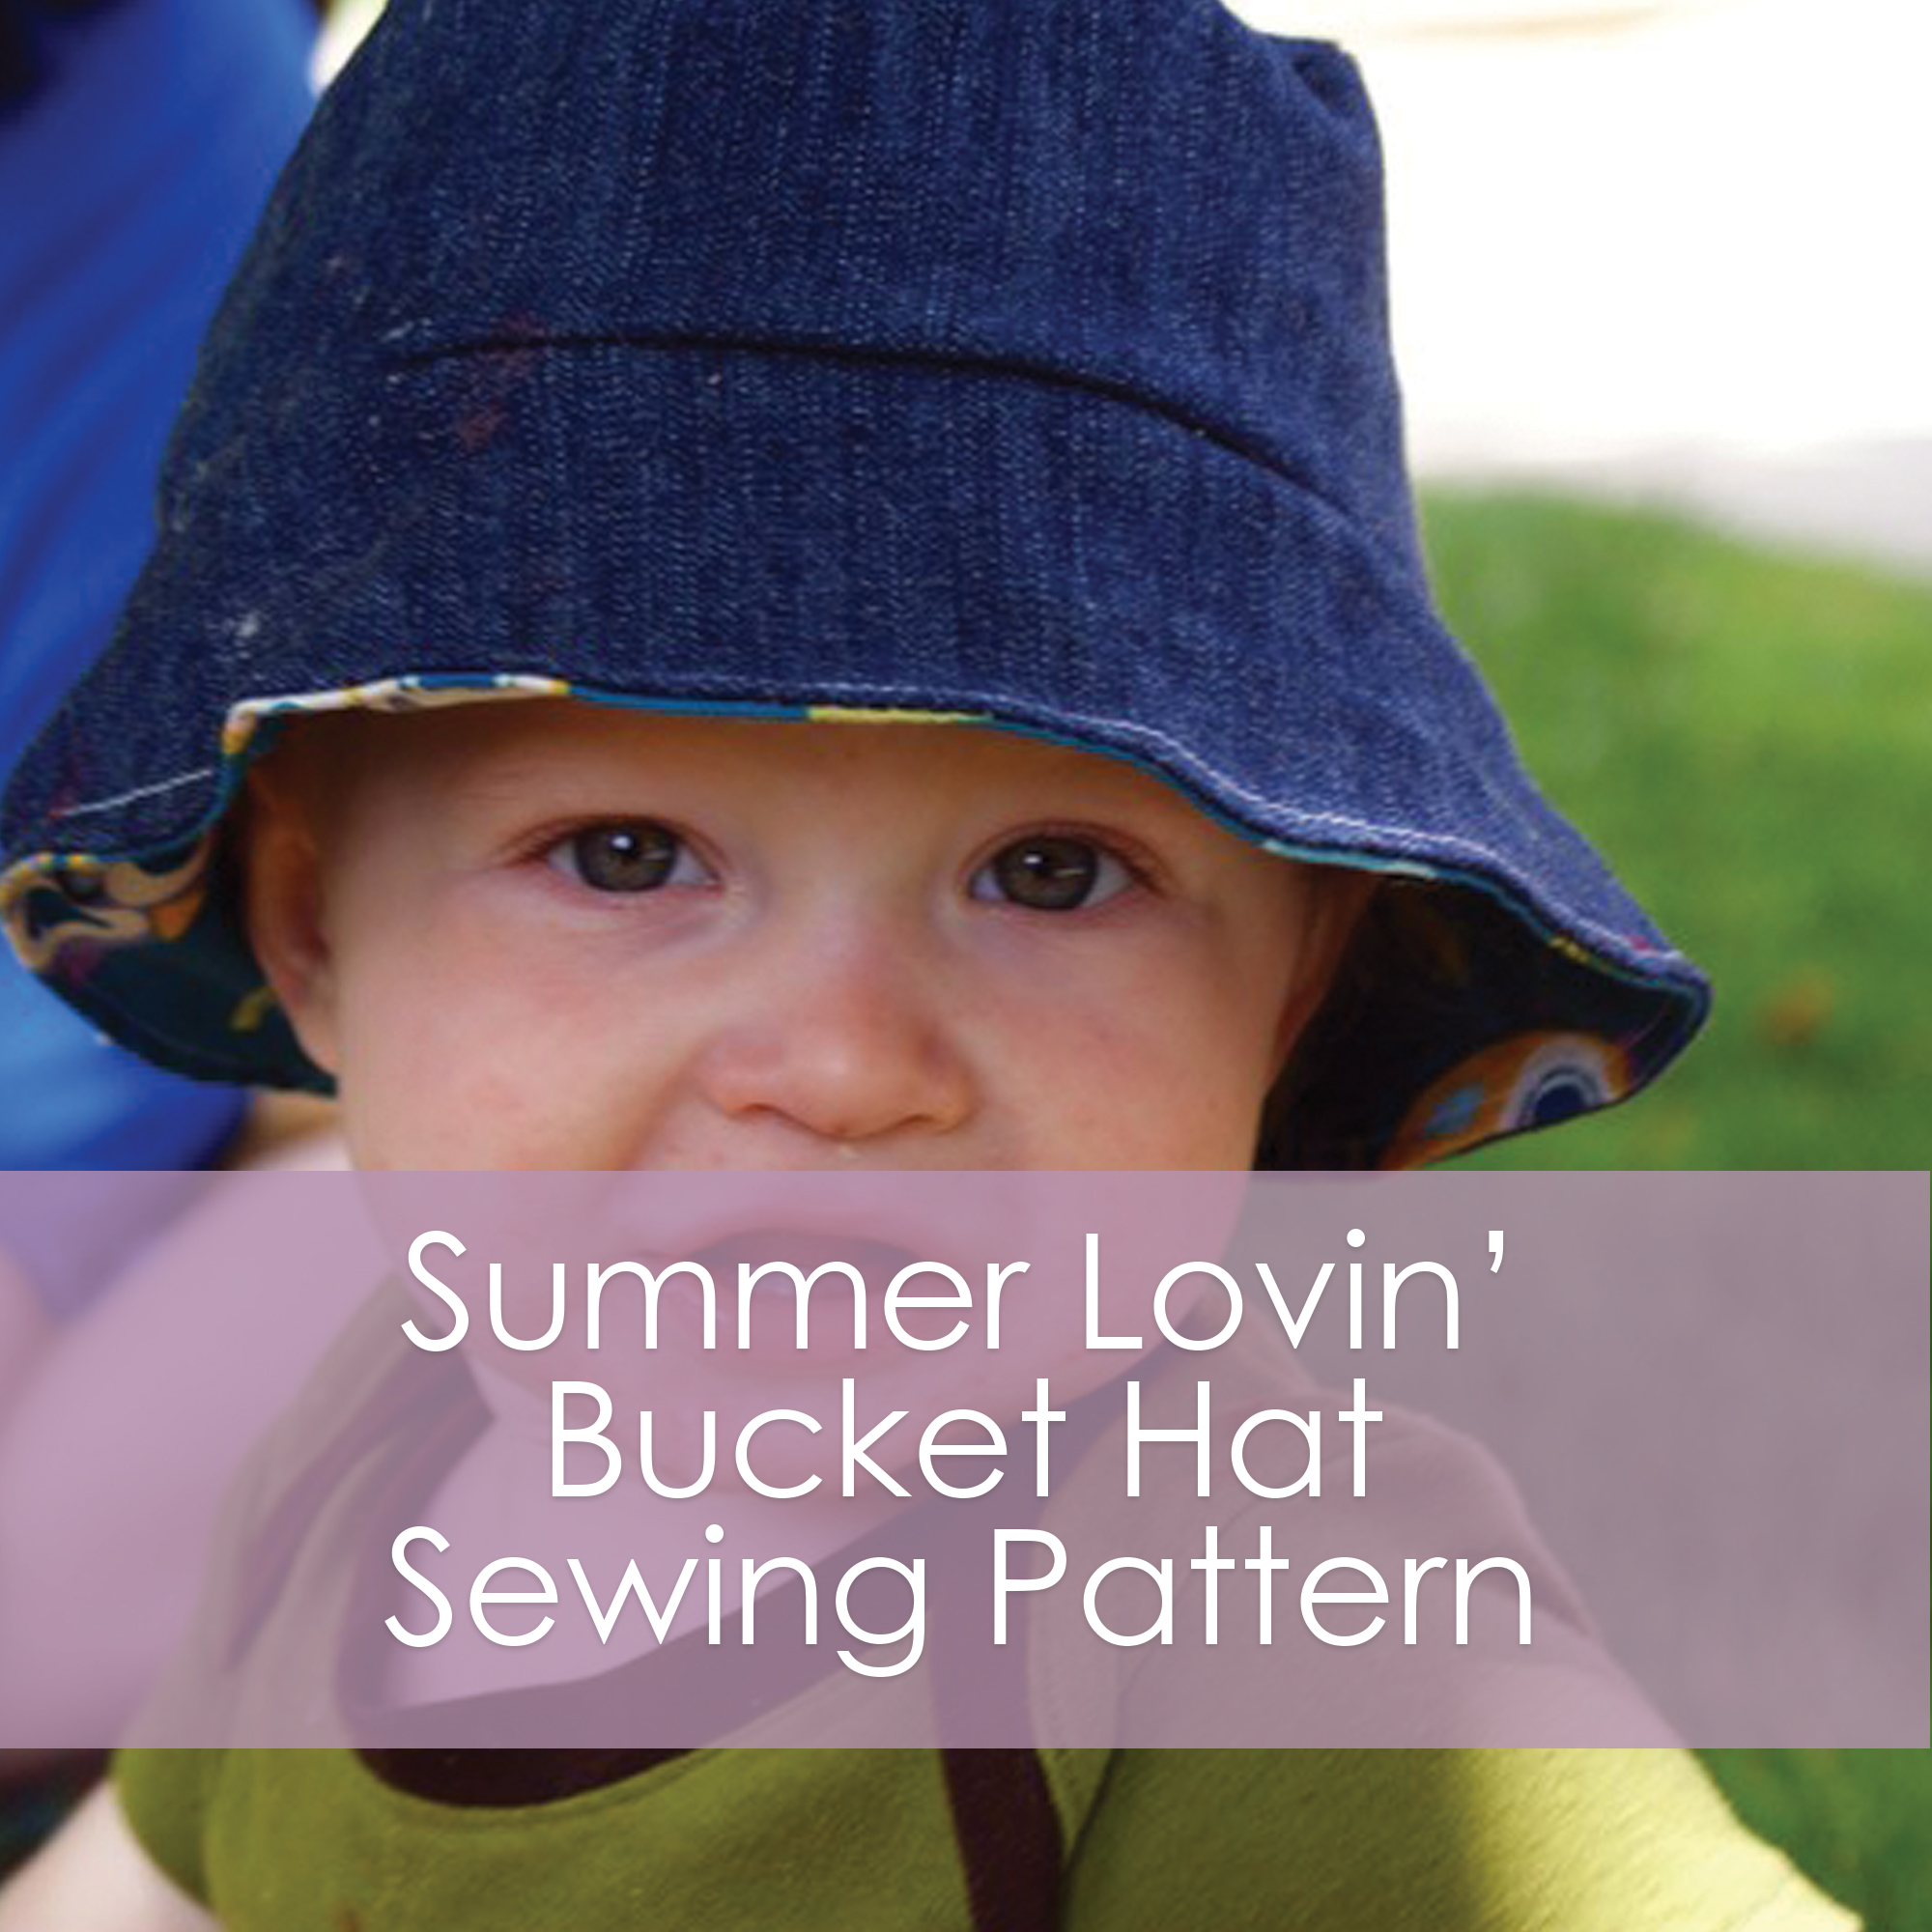 Summer Lovin' Free Bucket Hat Sewing Pattern from Muse of the Morning